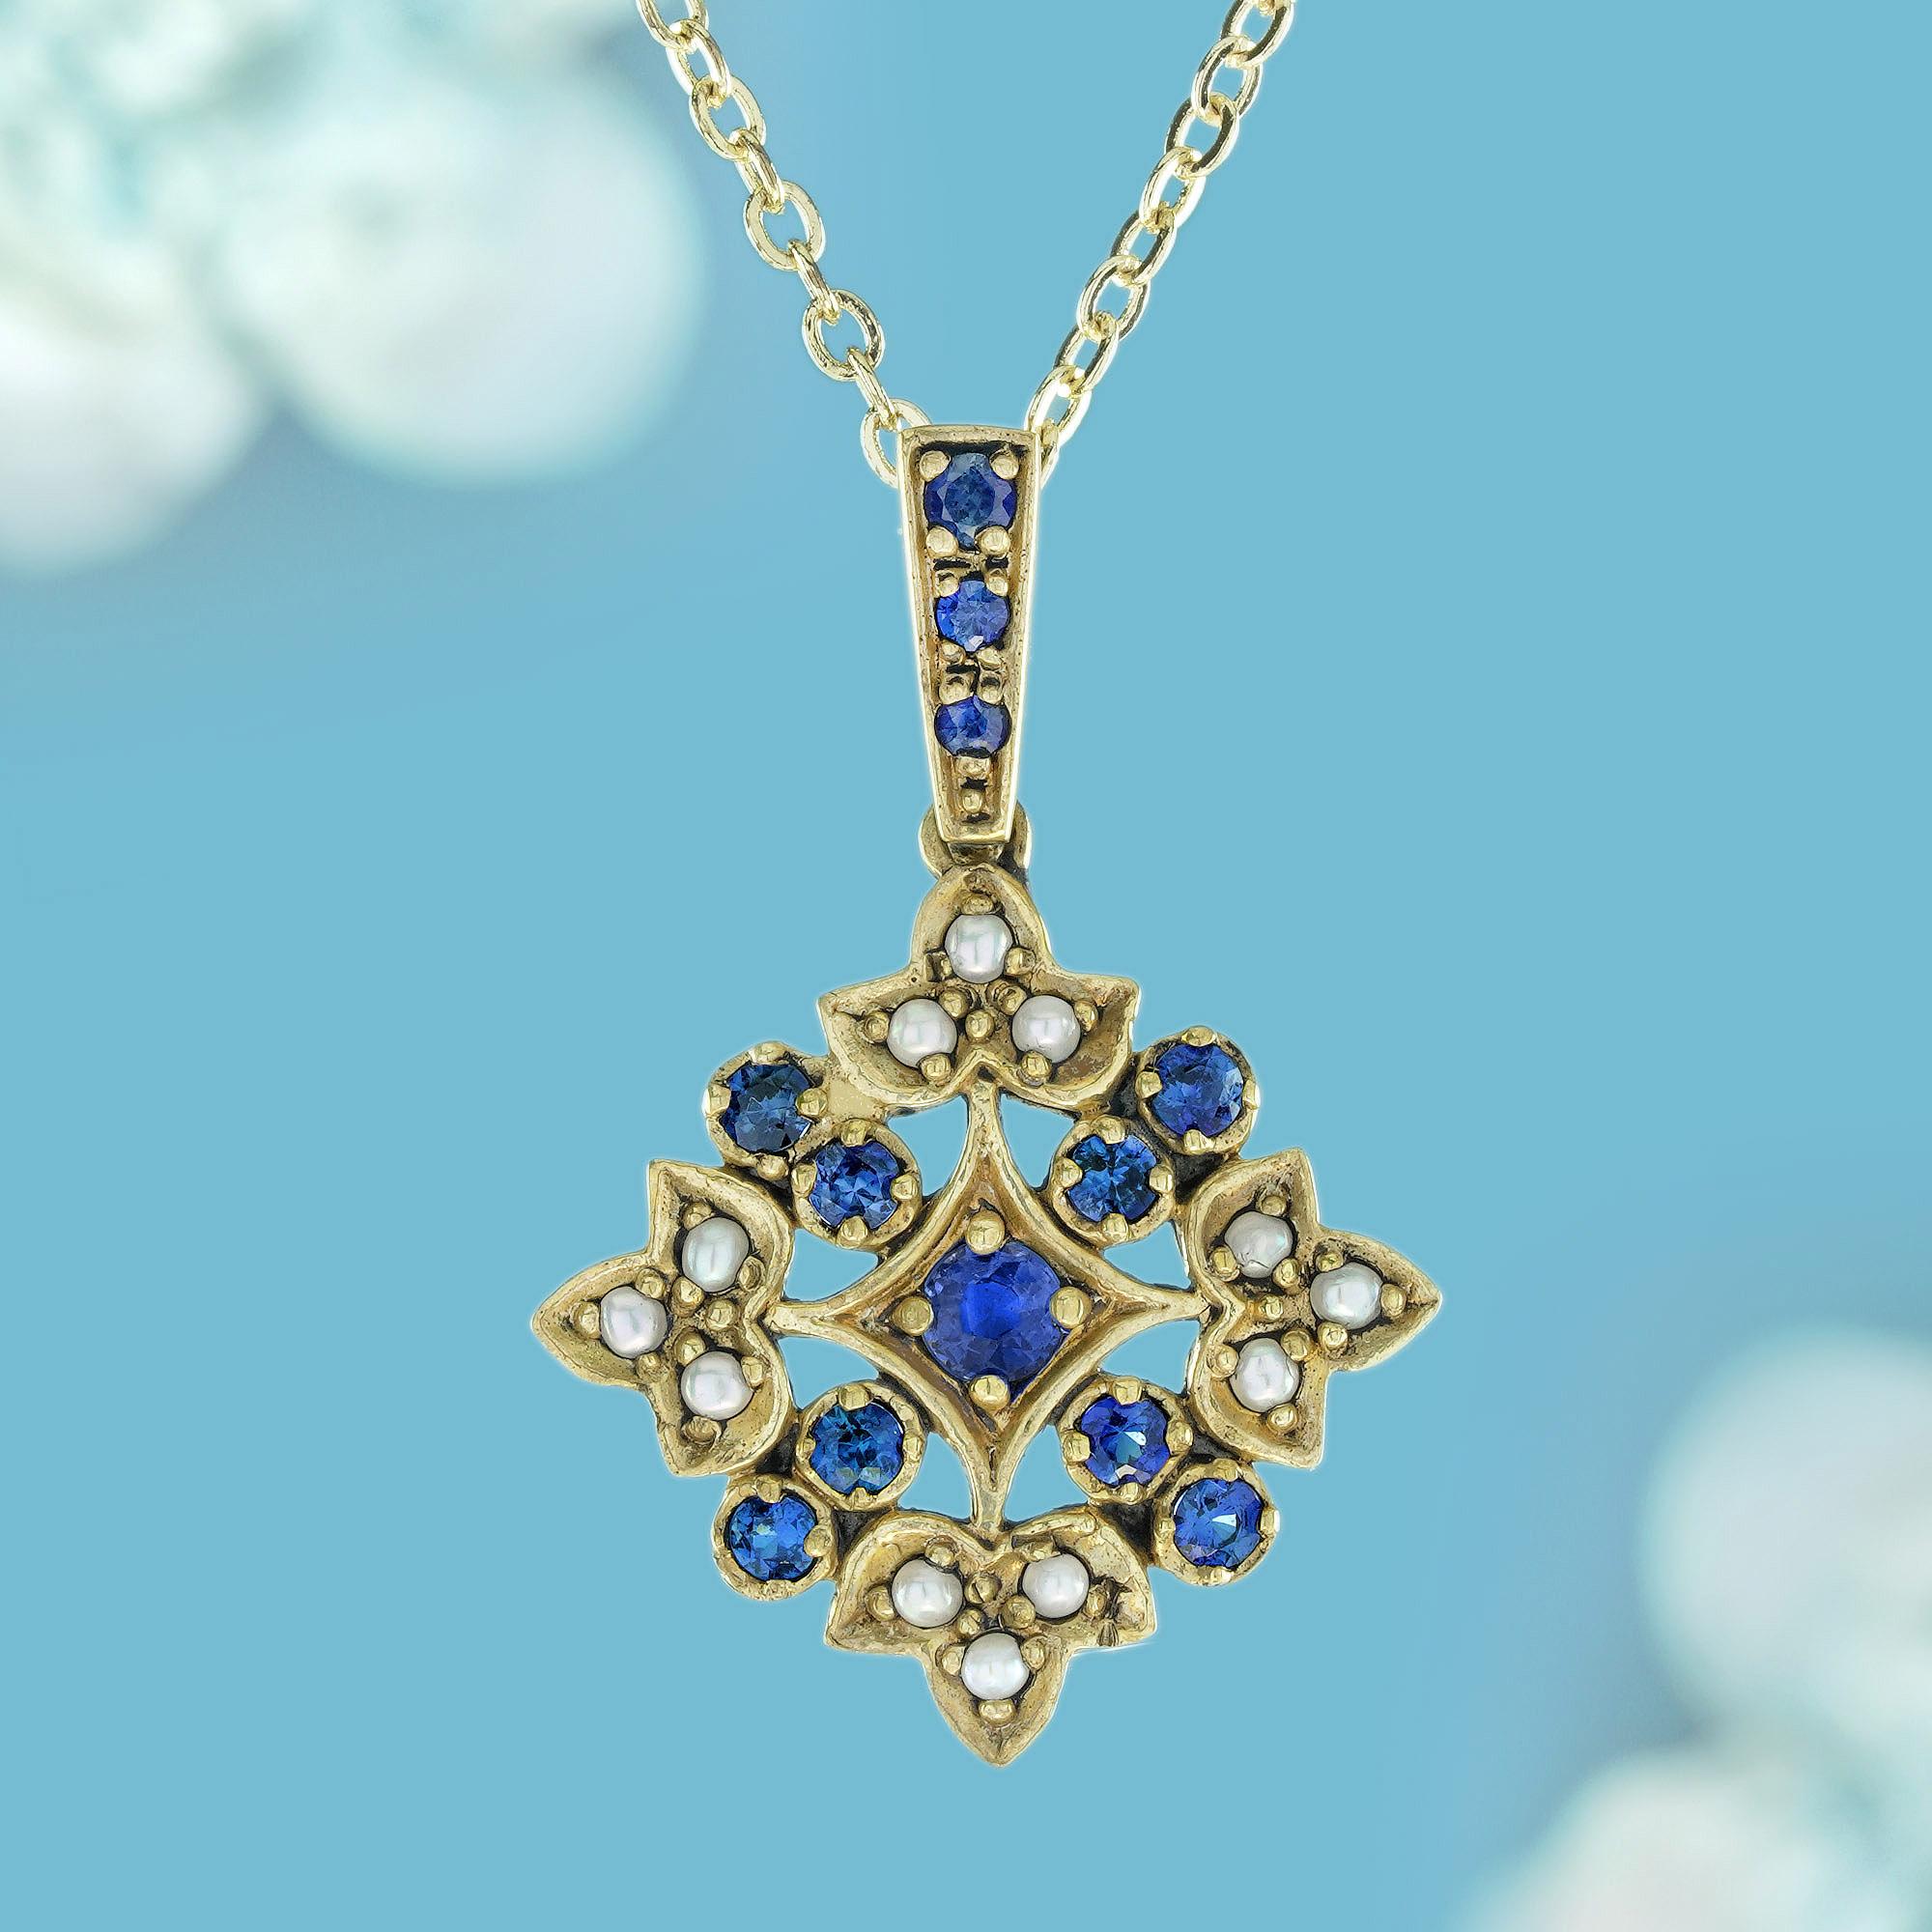 Crafted from solid yellow gold, this elegant floral pendant is adorned with cascading round opals on the bail. The pendant showcases a bloom floral clusters of eight petal-shaped designs, with 4 clusters crafted from vibrant round blue Sapphire set